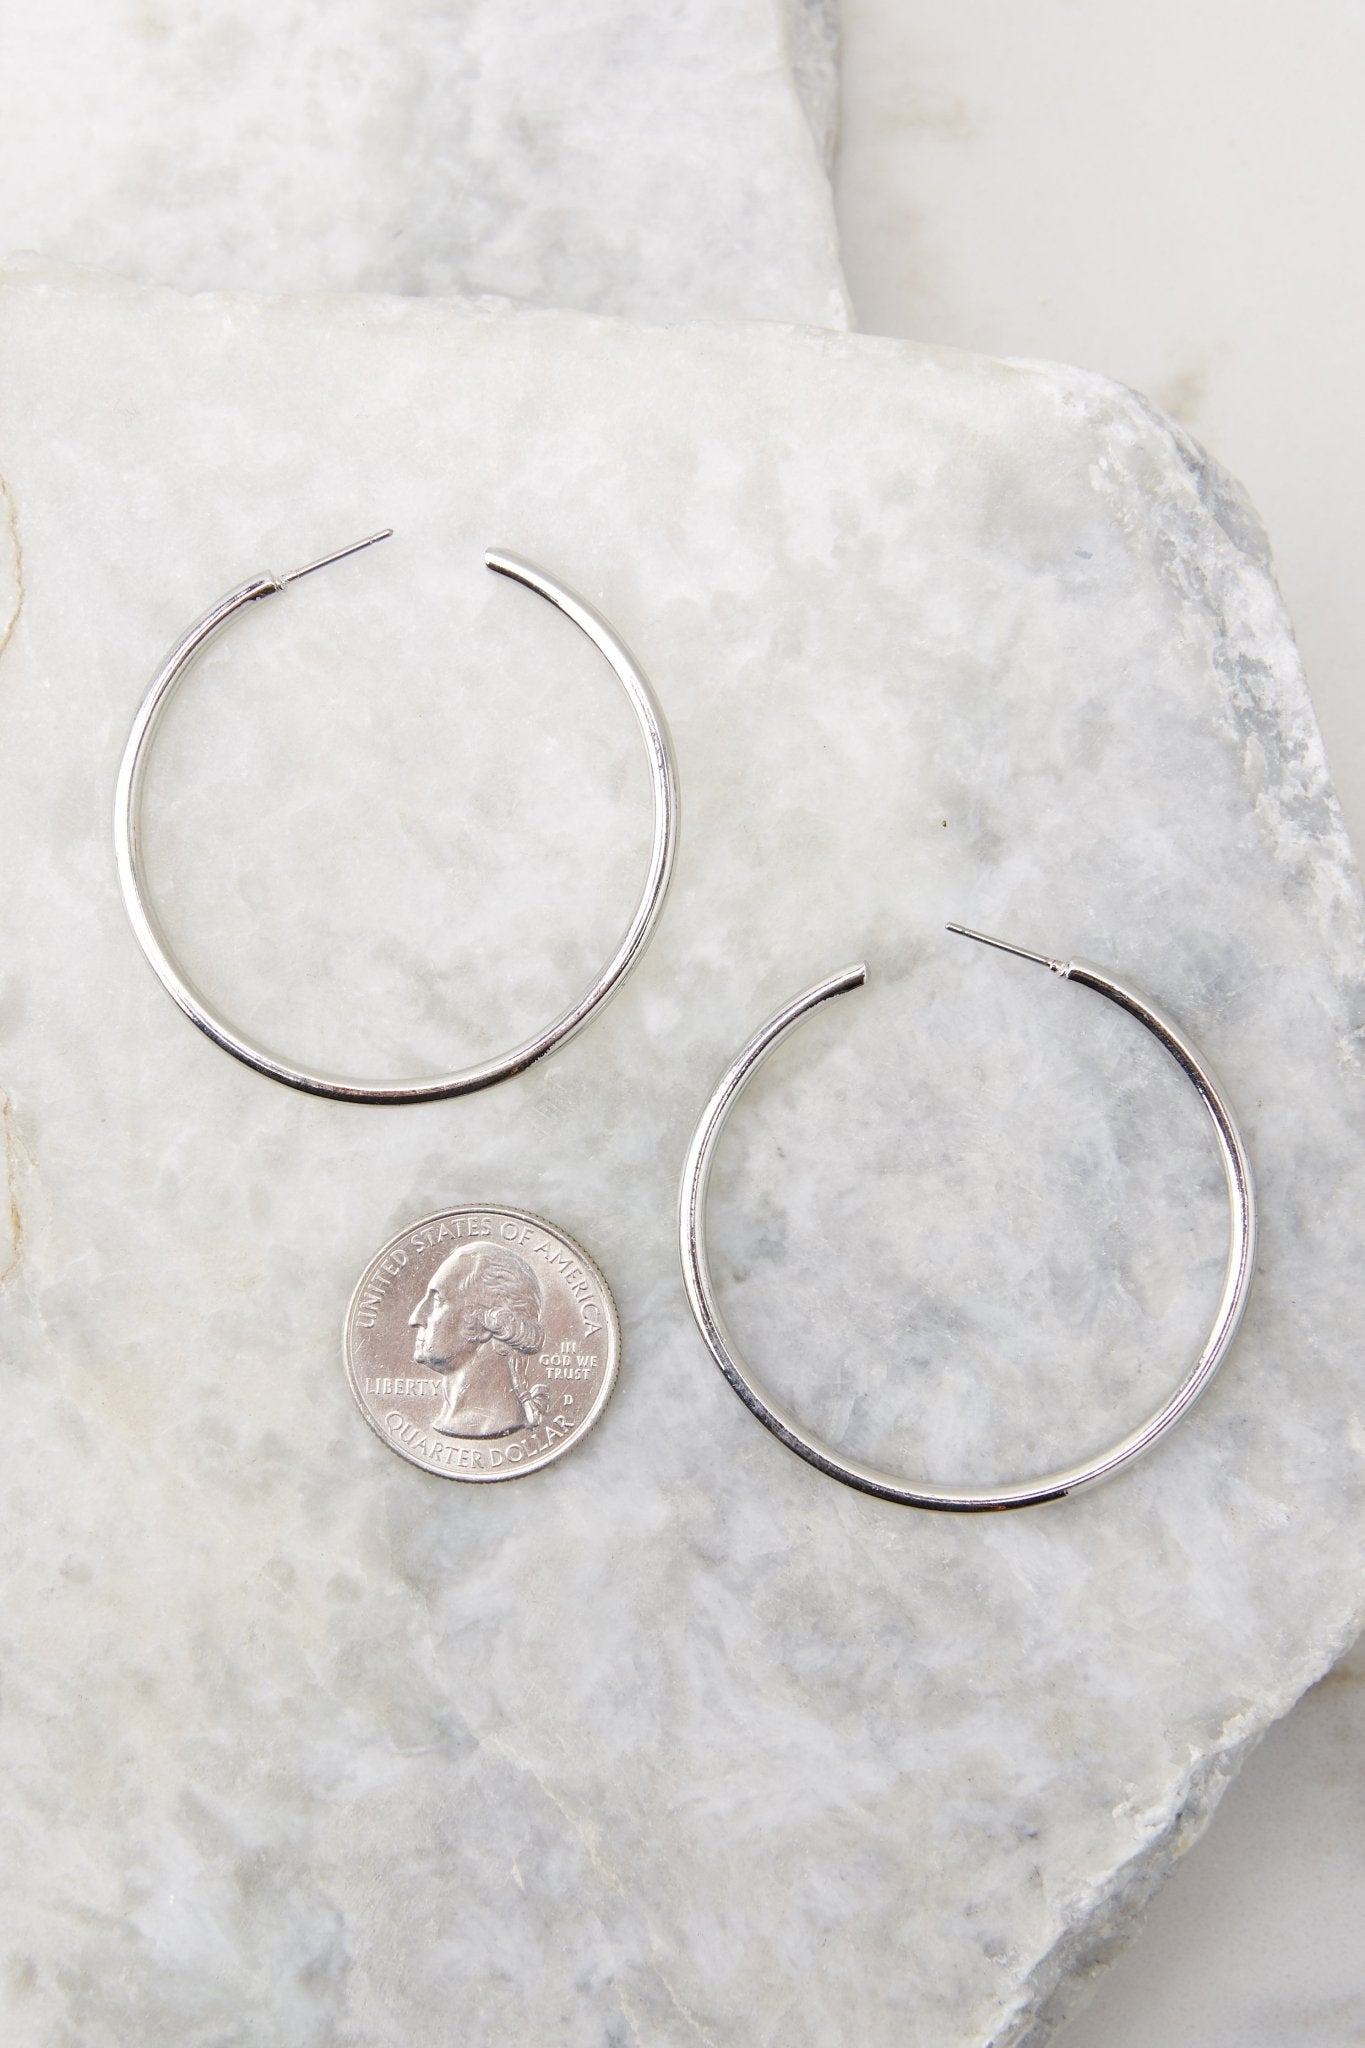 Detailed view of hoop earrings compared to quarter for actual size. Earrings measure 2.5